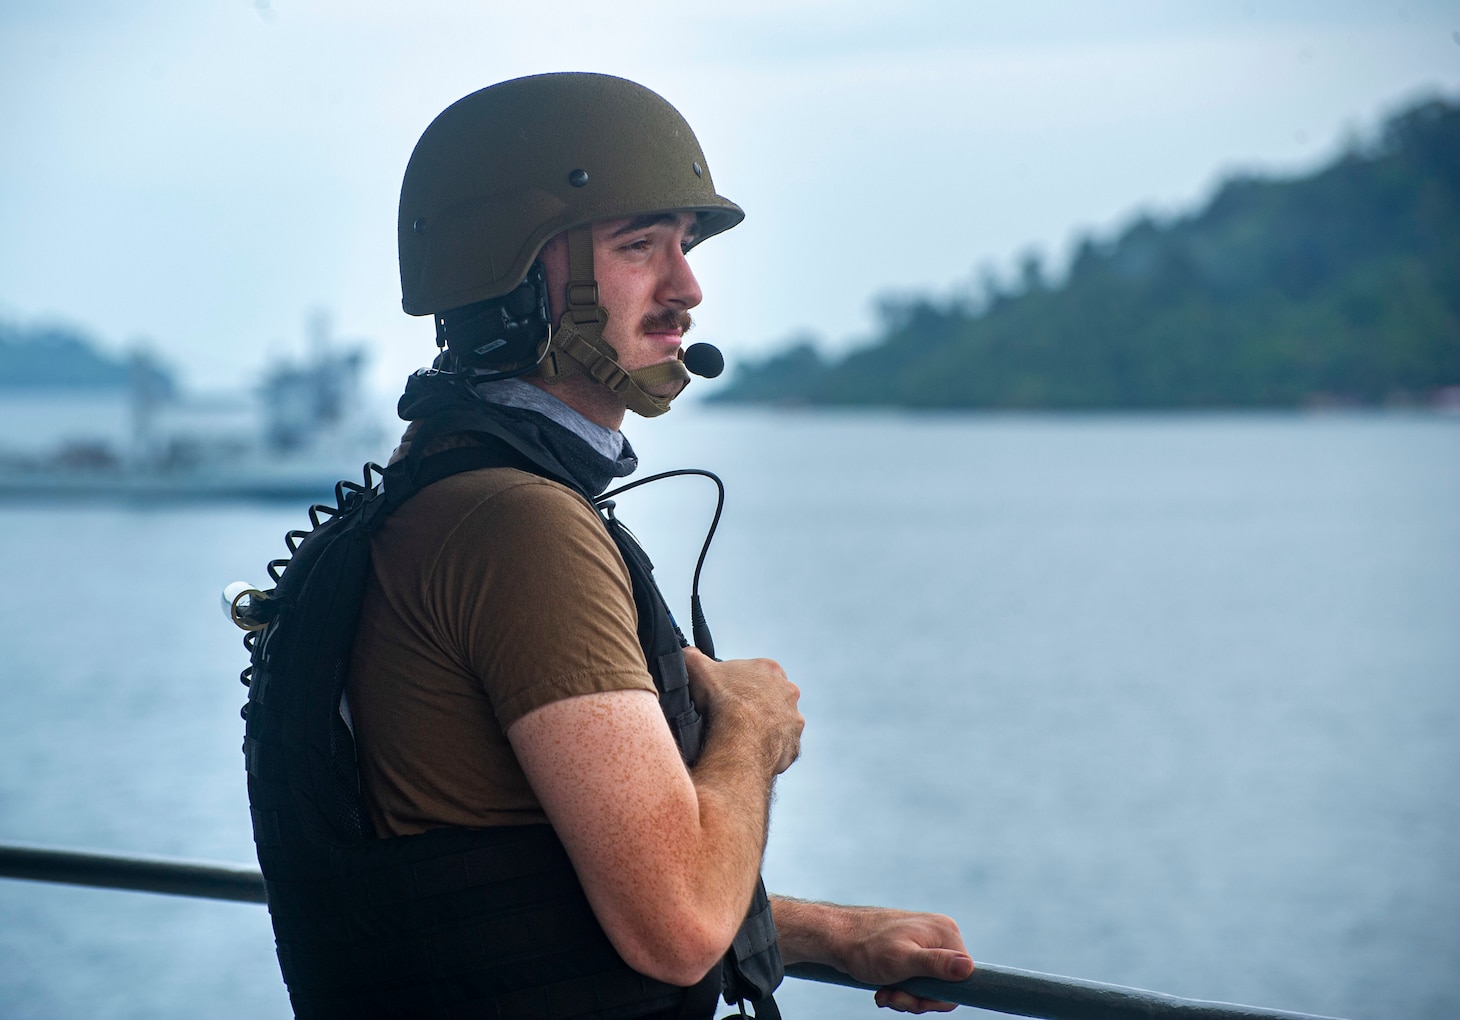 KOTA KINABALU, Malaysia (July 17, 2022) Gunner’s Mate 3rd Class Christian Freda, from Long Island, New York, assigned to the Emory S. Land-class submarine tender USS Frank Cable (AS 40), stands watch as the ship departs from Sepanggar Naval Base in Kota Kinabalu, Malaysia, July 17, 2022.  Frank Cable is currently on patrol conducting expeditionary maintenance and logistics in support of a free Indo-Pacific in the U.S. 7th Fleet area of operations. (U.S. Navy photo by Mass Communication Specialist 3rd Class Wendy Arauz)